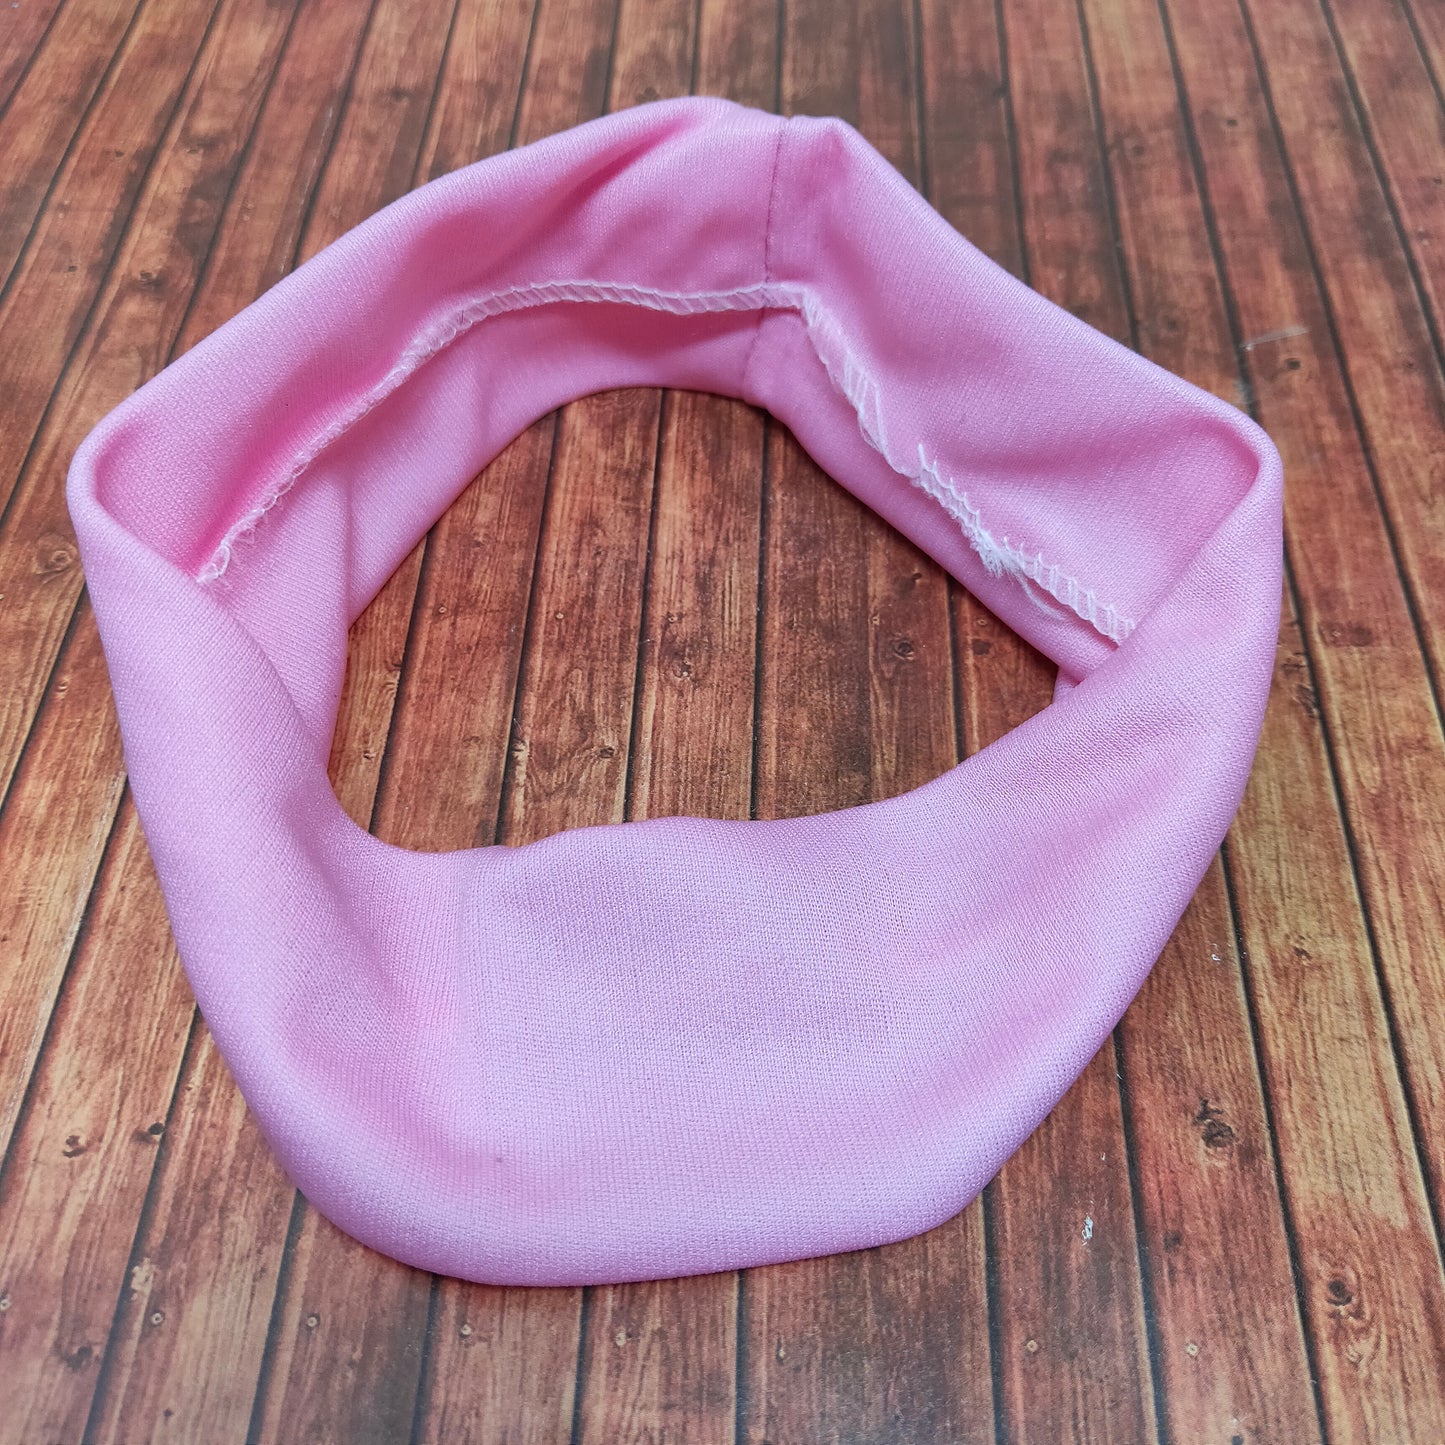 Plain Soft Stretchy Headbands for Girls and Women for Yoga and Workout (17-41 Headband)